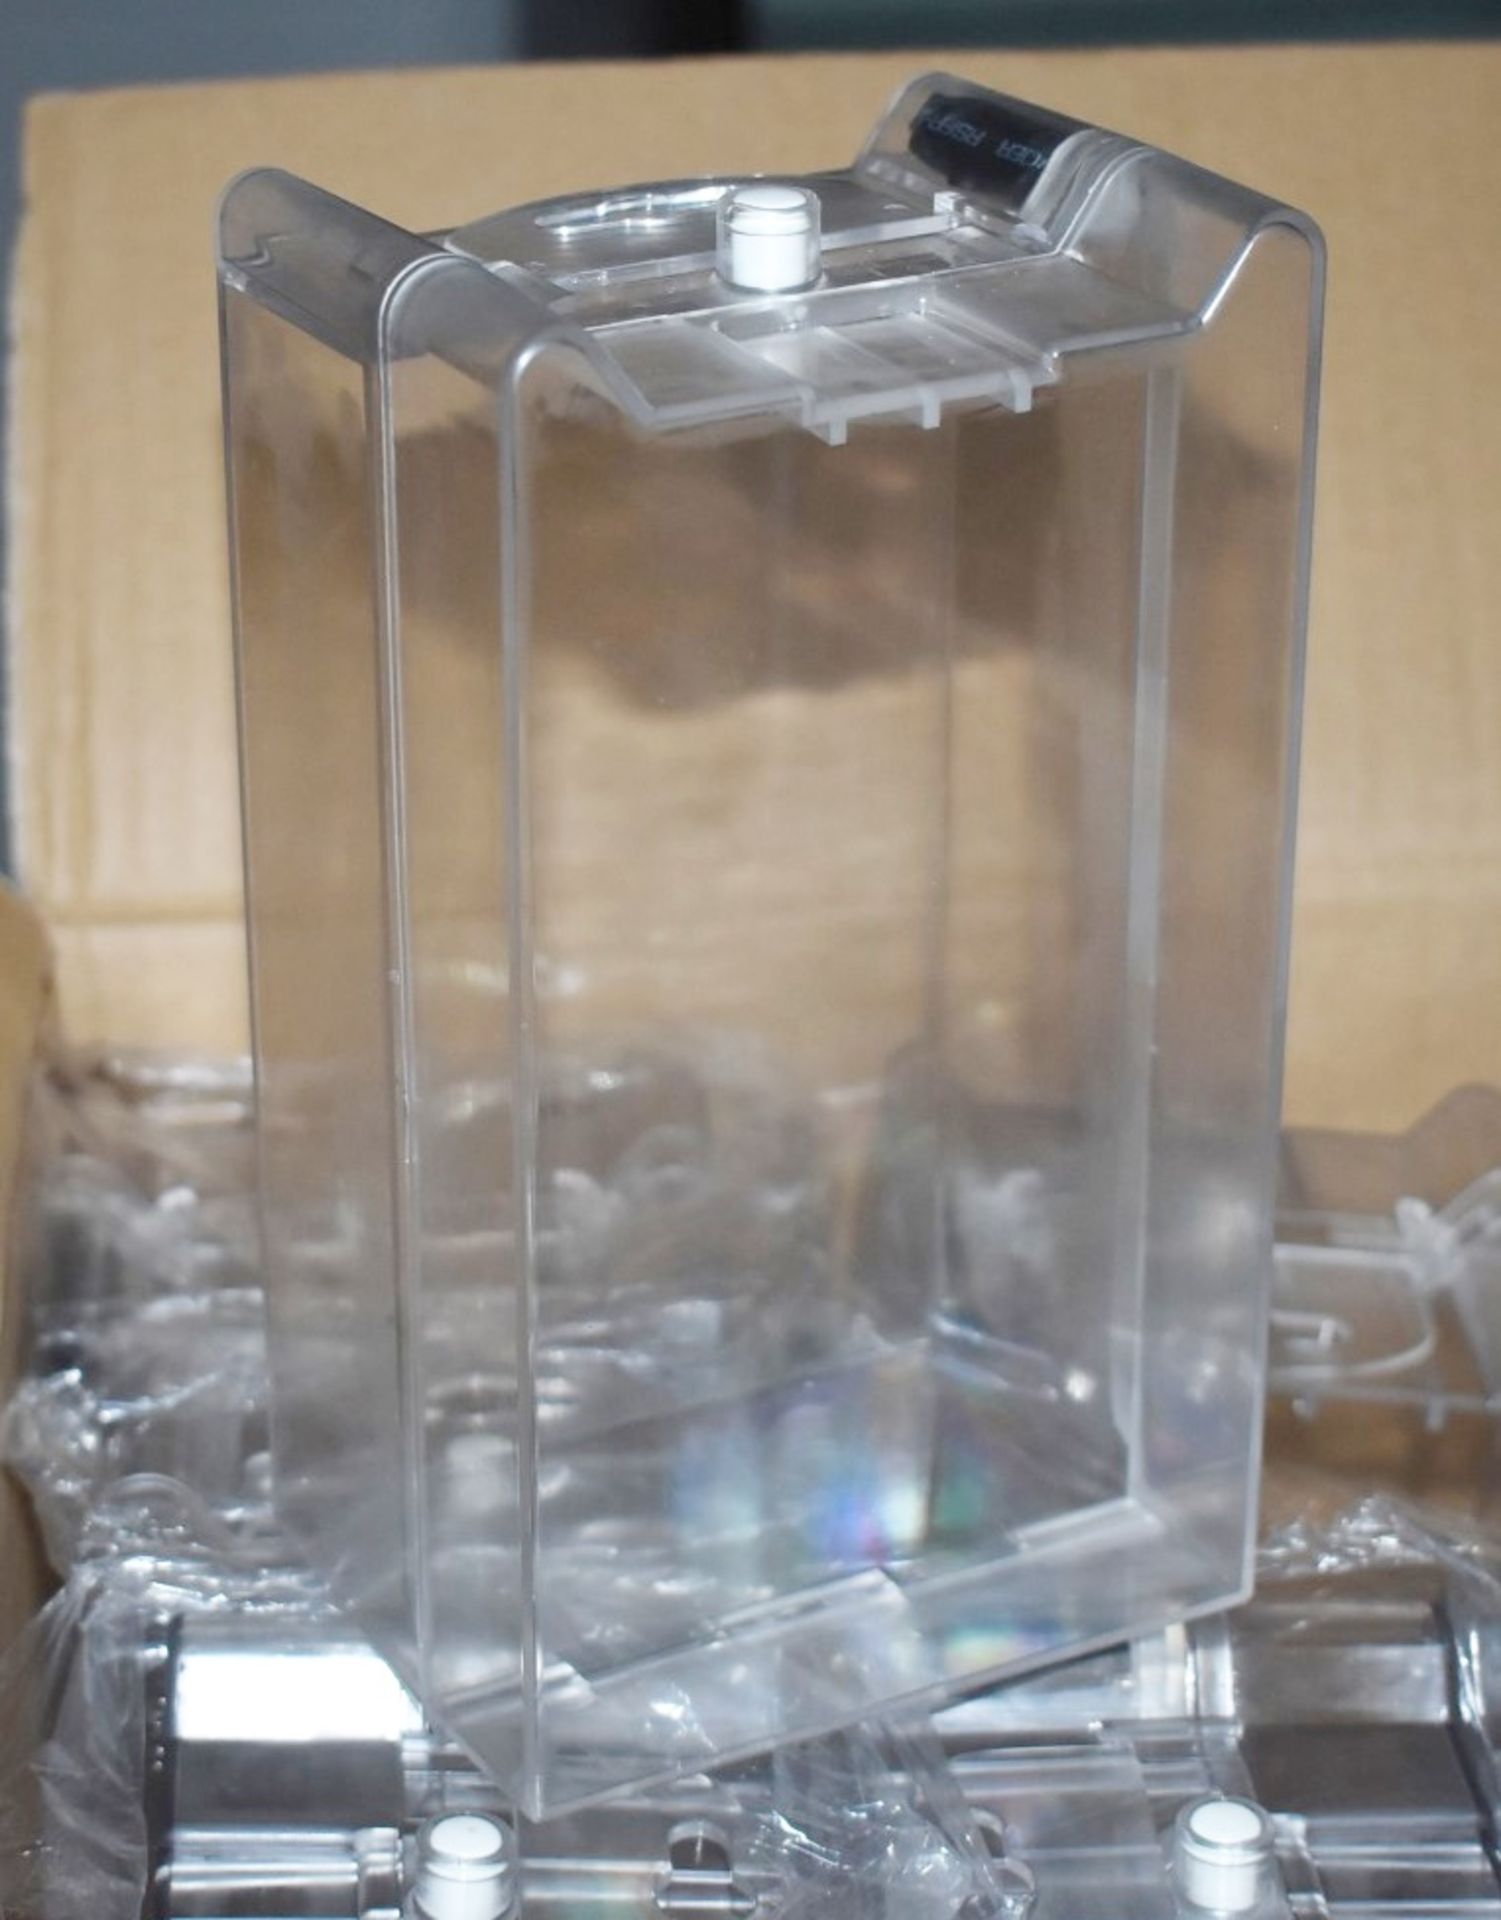 40 x Catalyst Clear Acrylic Retail Security Safer Cases With RF Tags and Hanging Tags - Brand New - Image 5 of 9